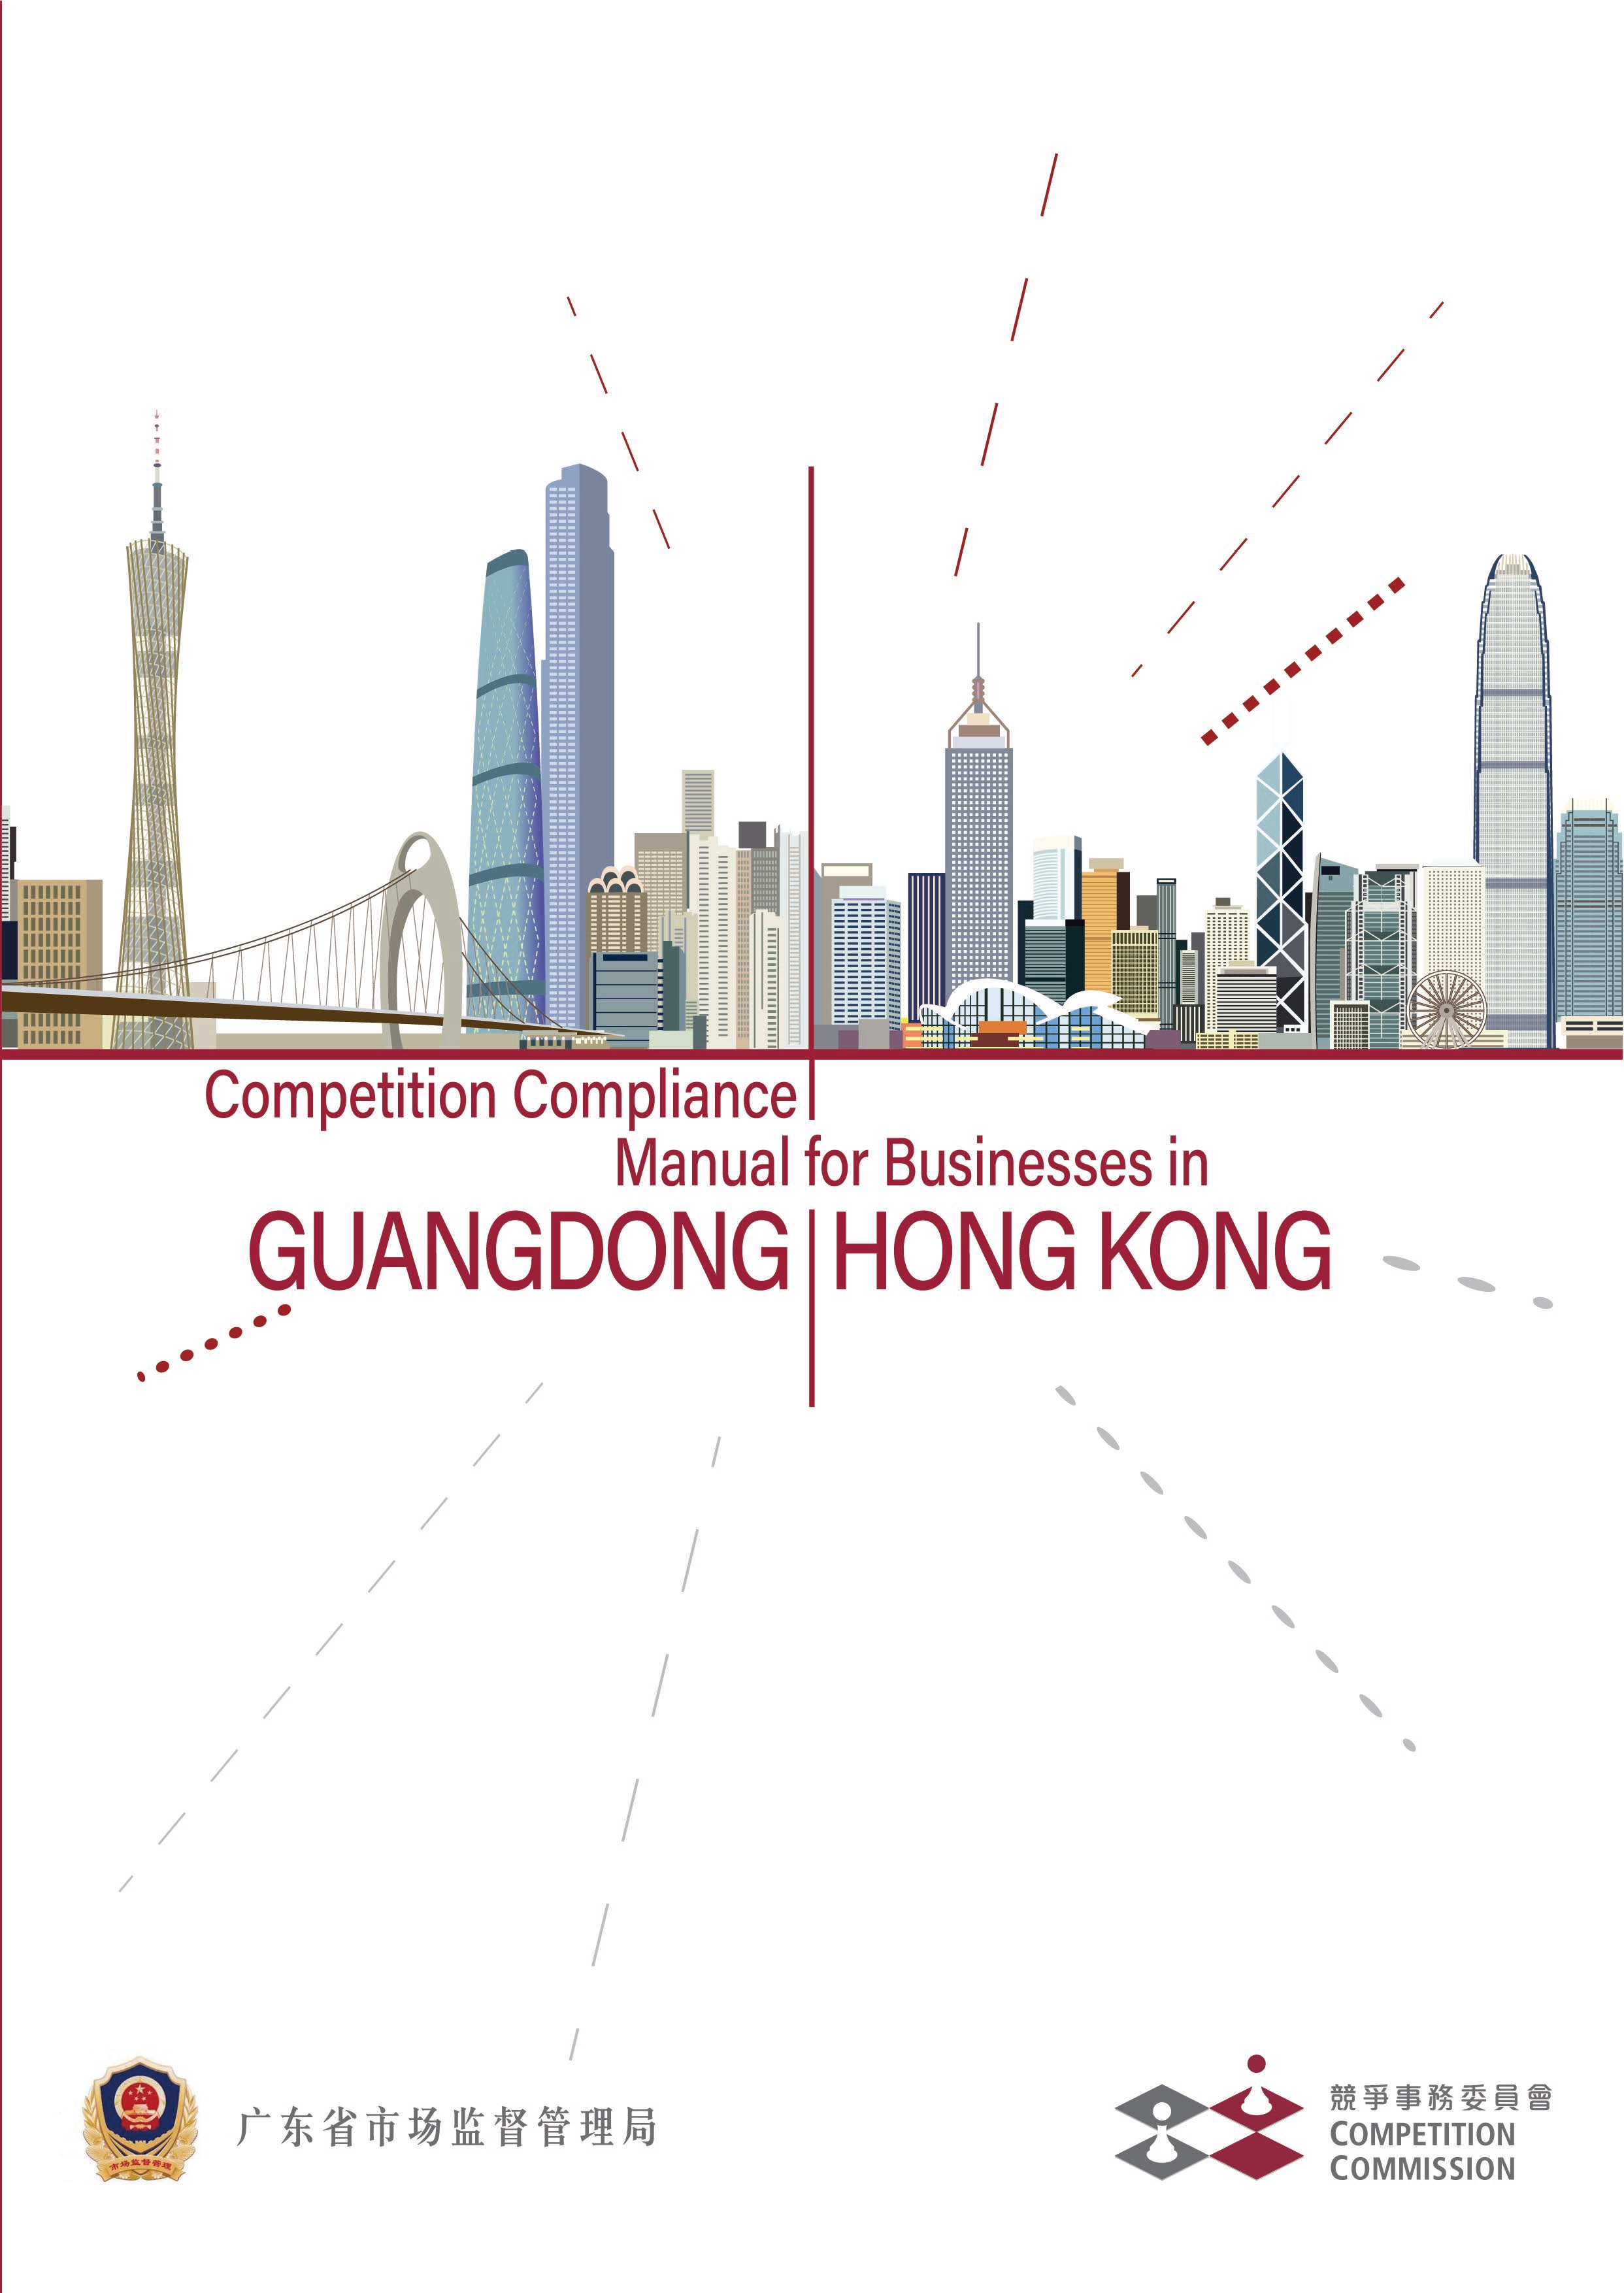 Competition Compliance Manual for Businesses in Guangdong and Hong Kong